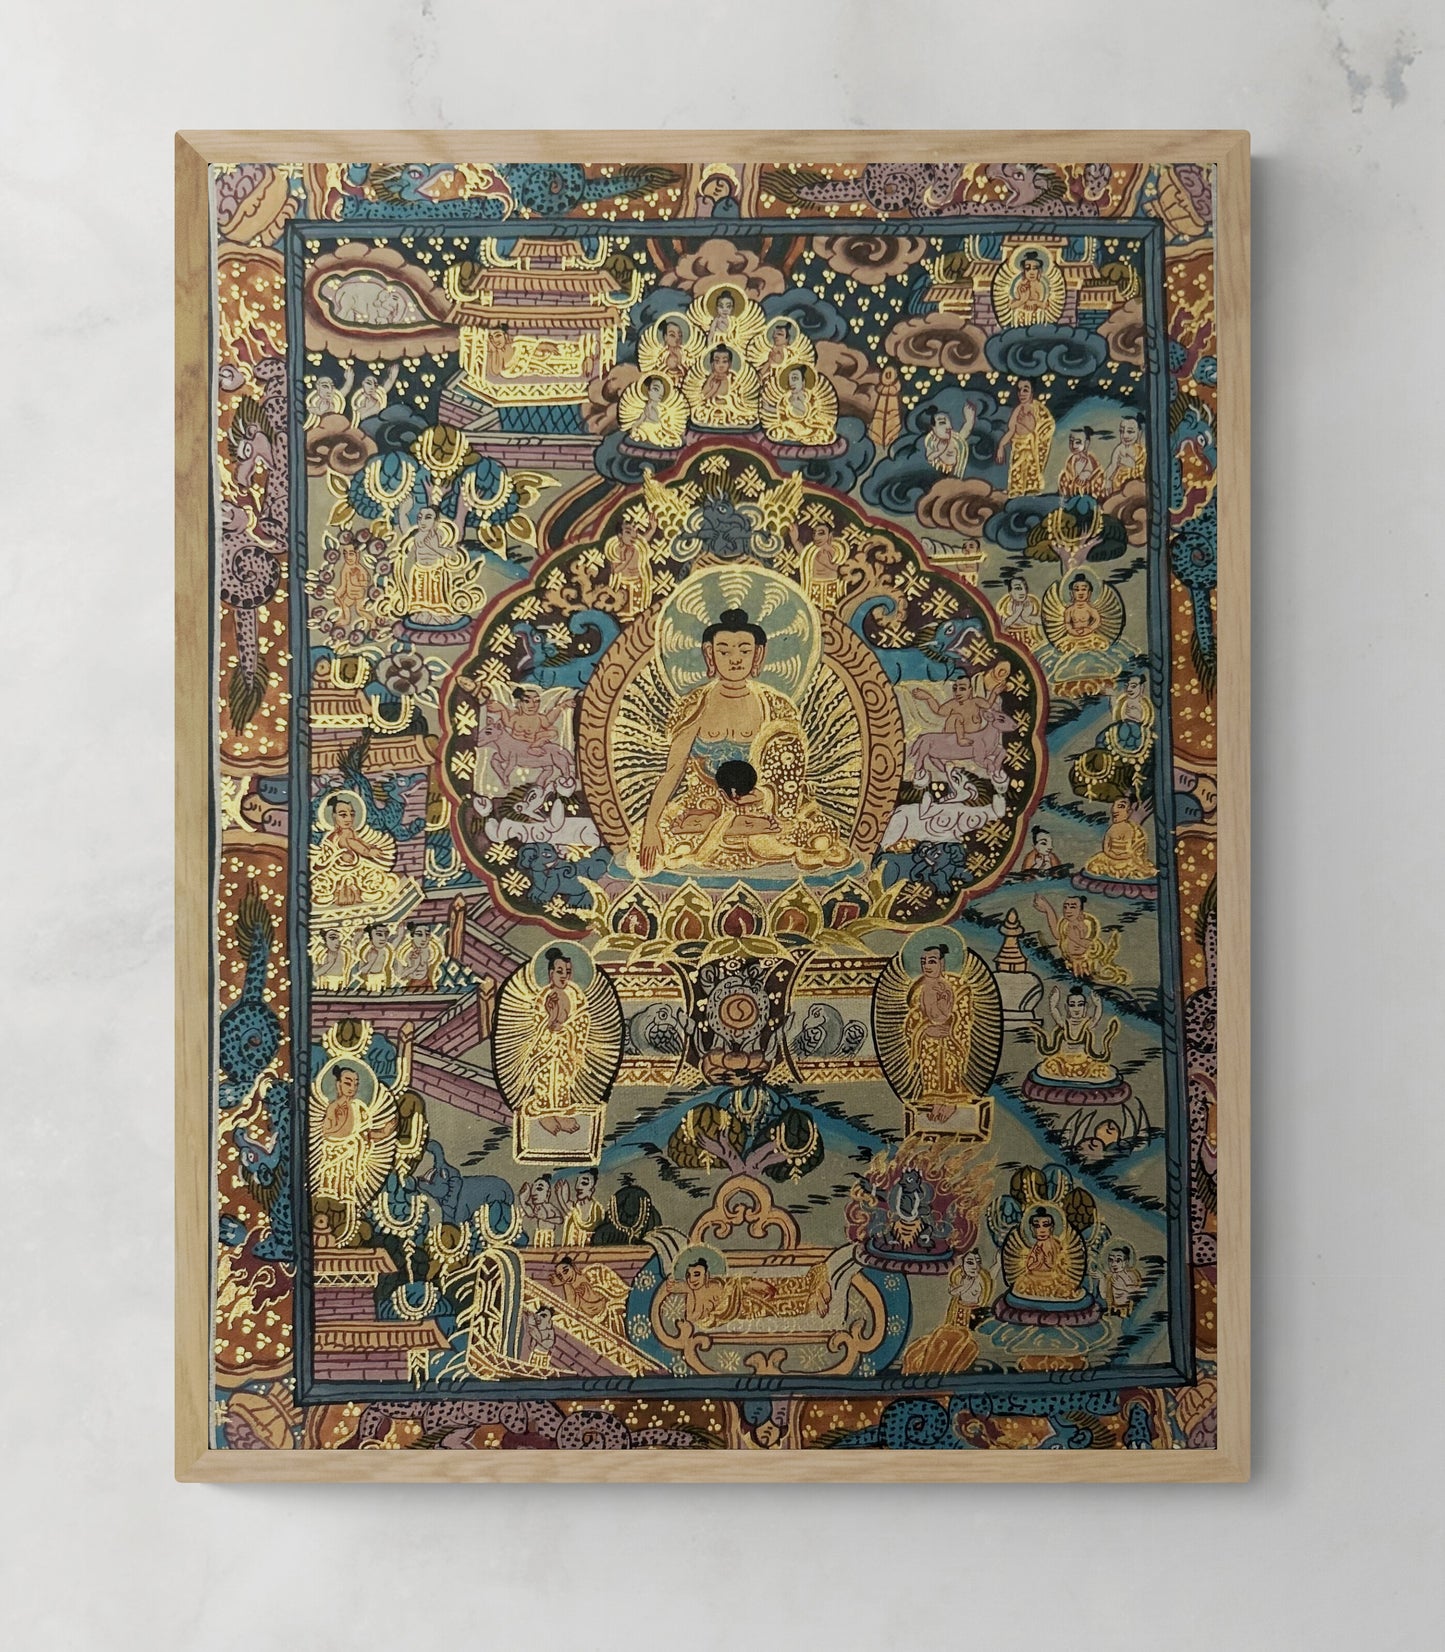 Buddha's Life Story Thangka painting showing Siddhartha Gautama's journey to enlightenment, with Buddhist symbols and prophetic dream depiction